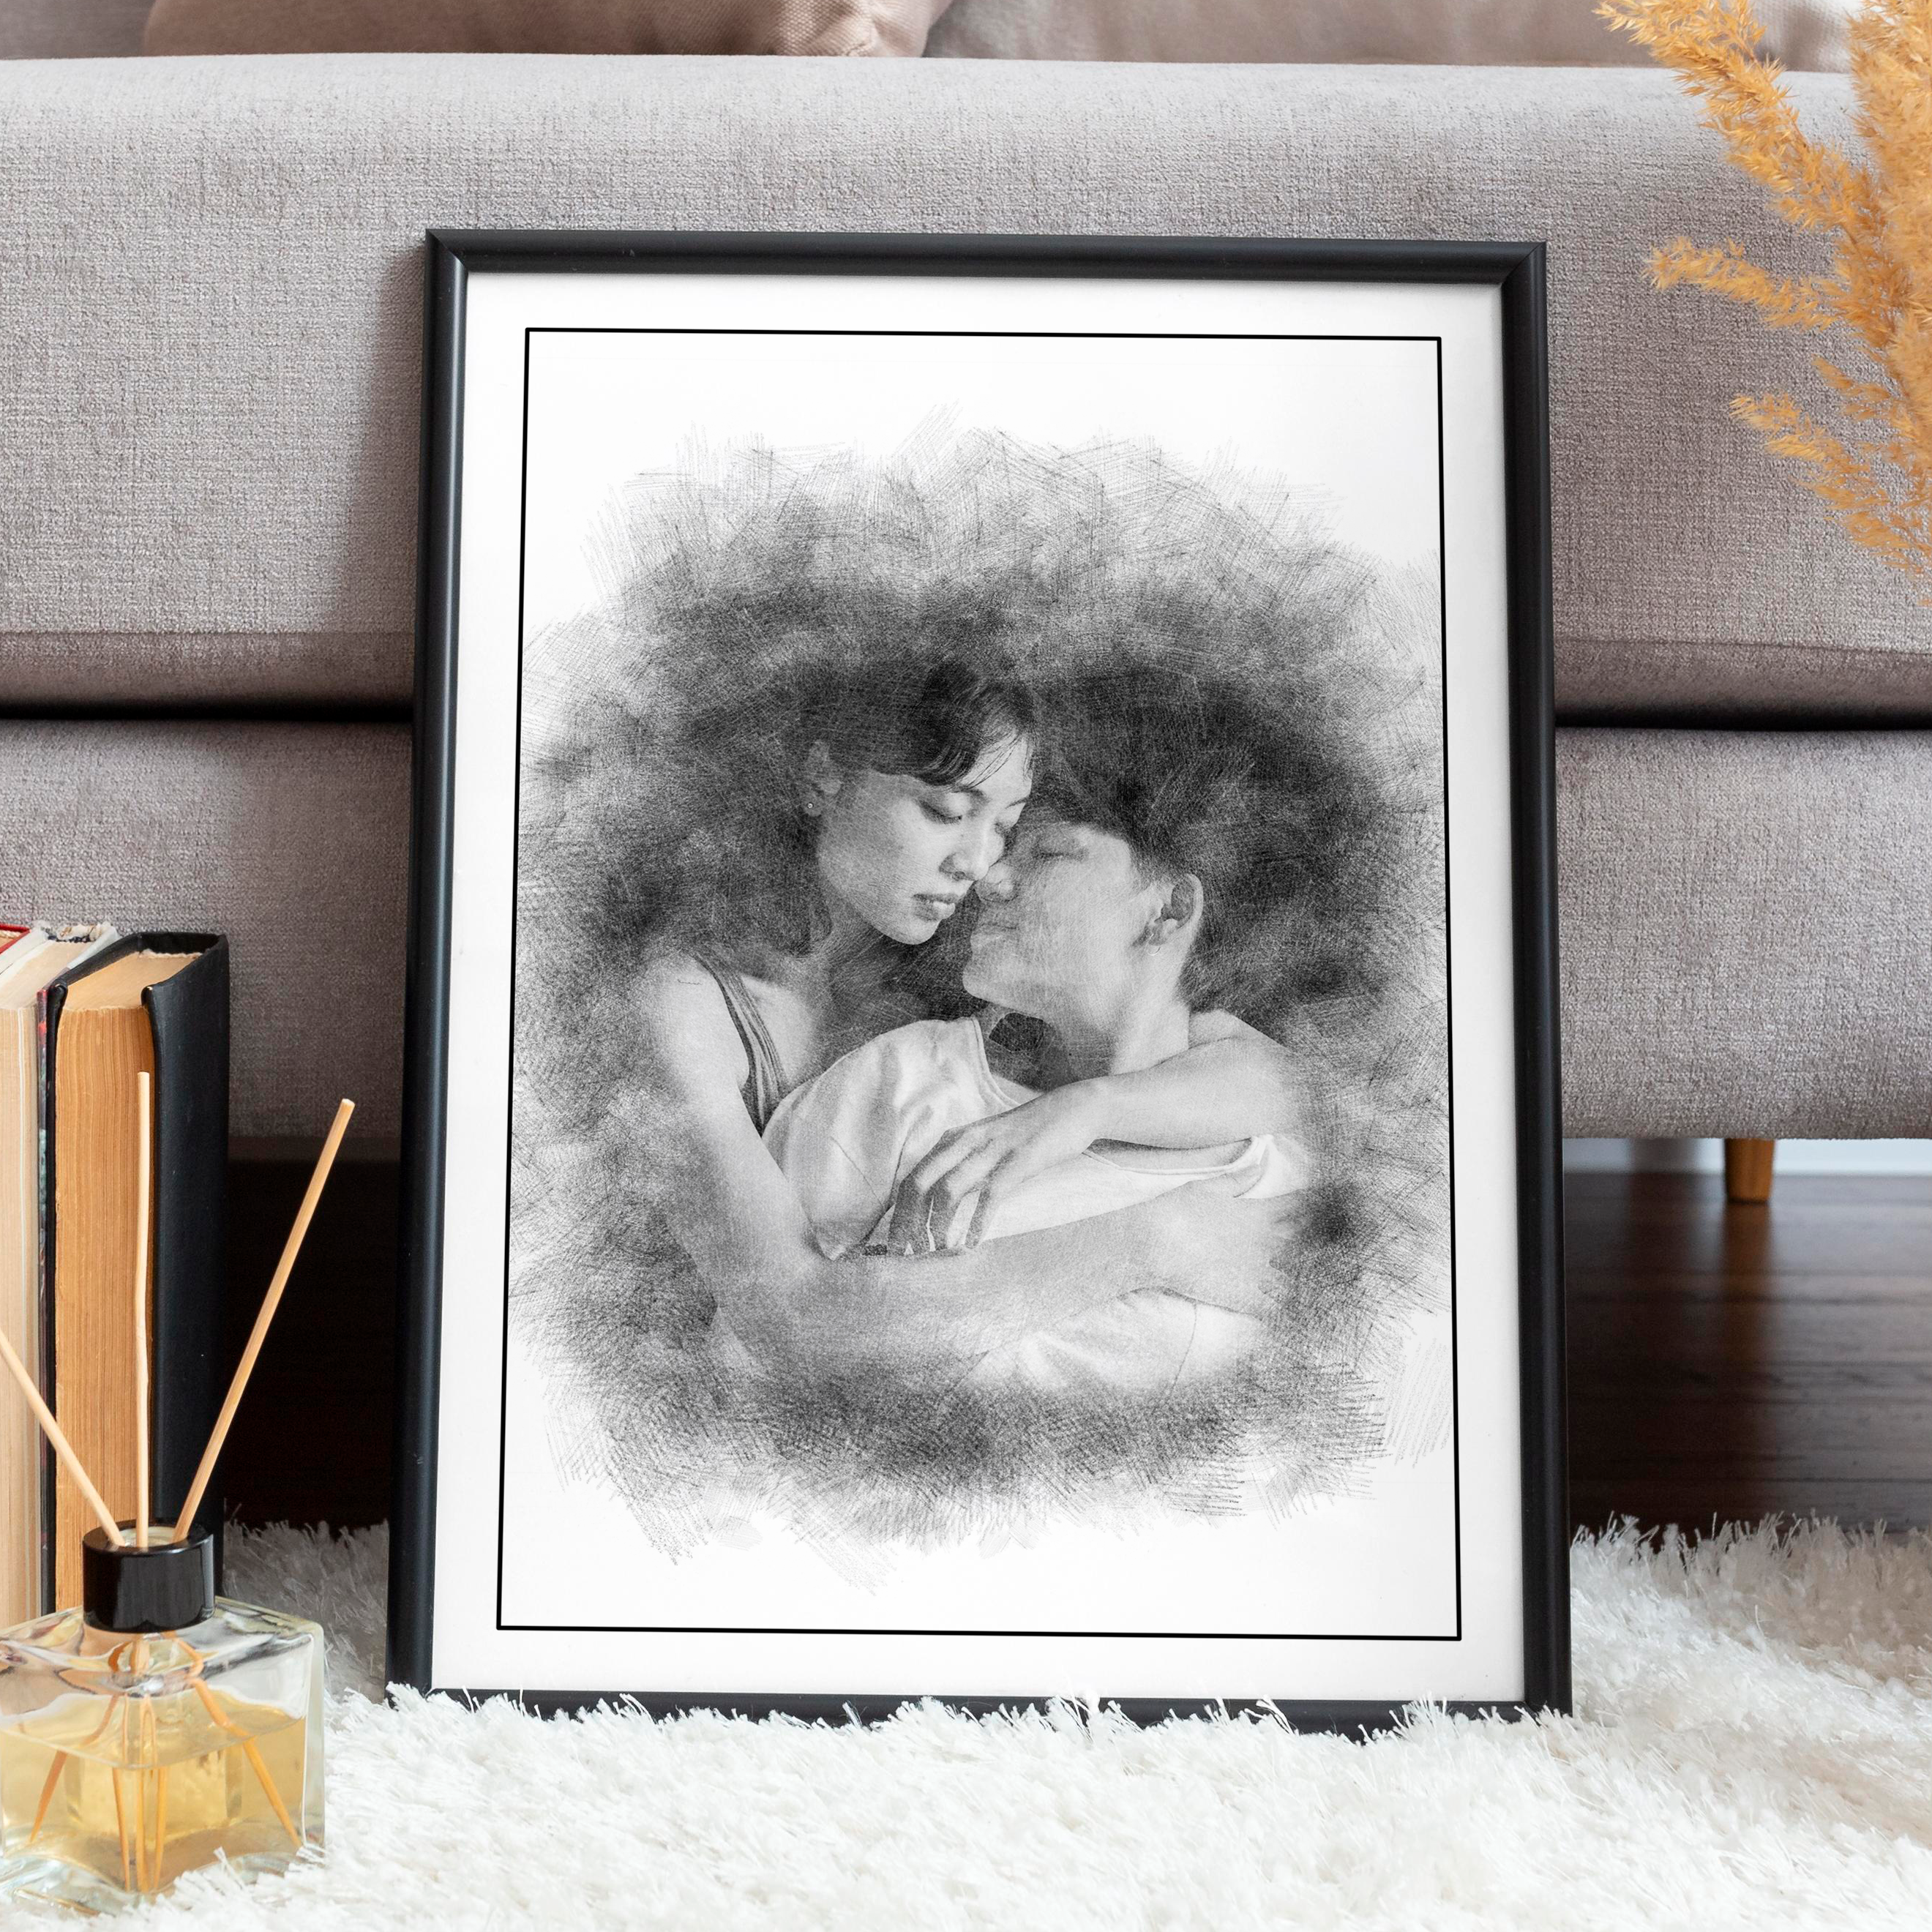 Wall art of a couple portrait in charcoal sketch style